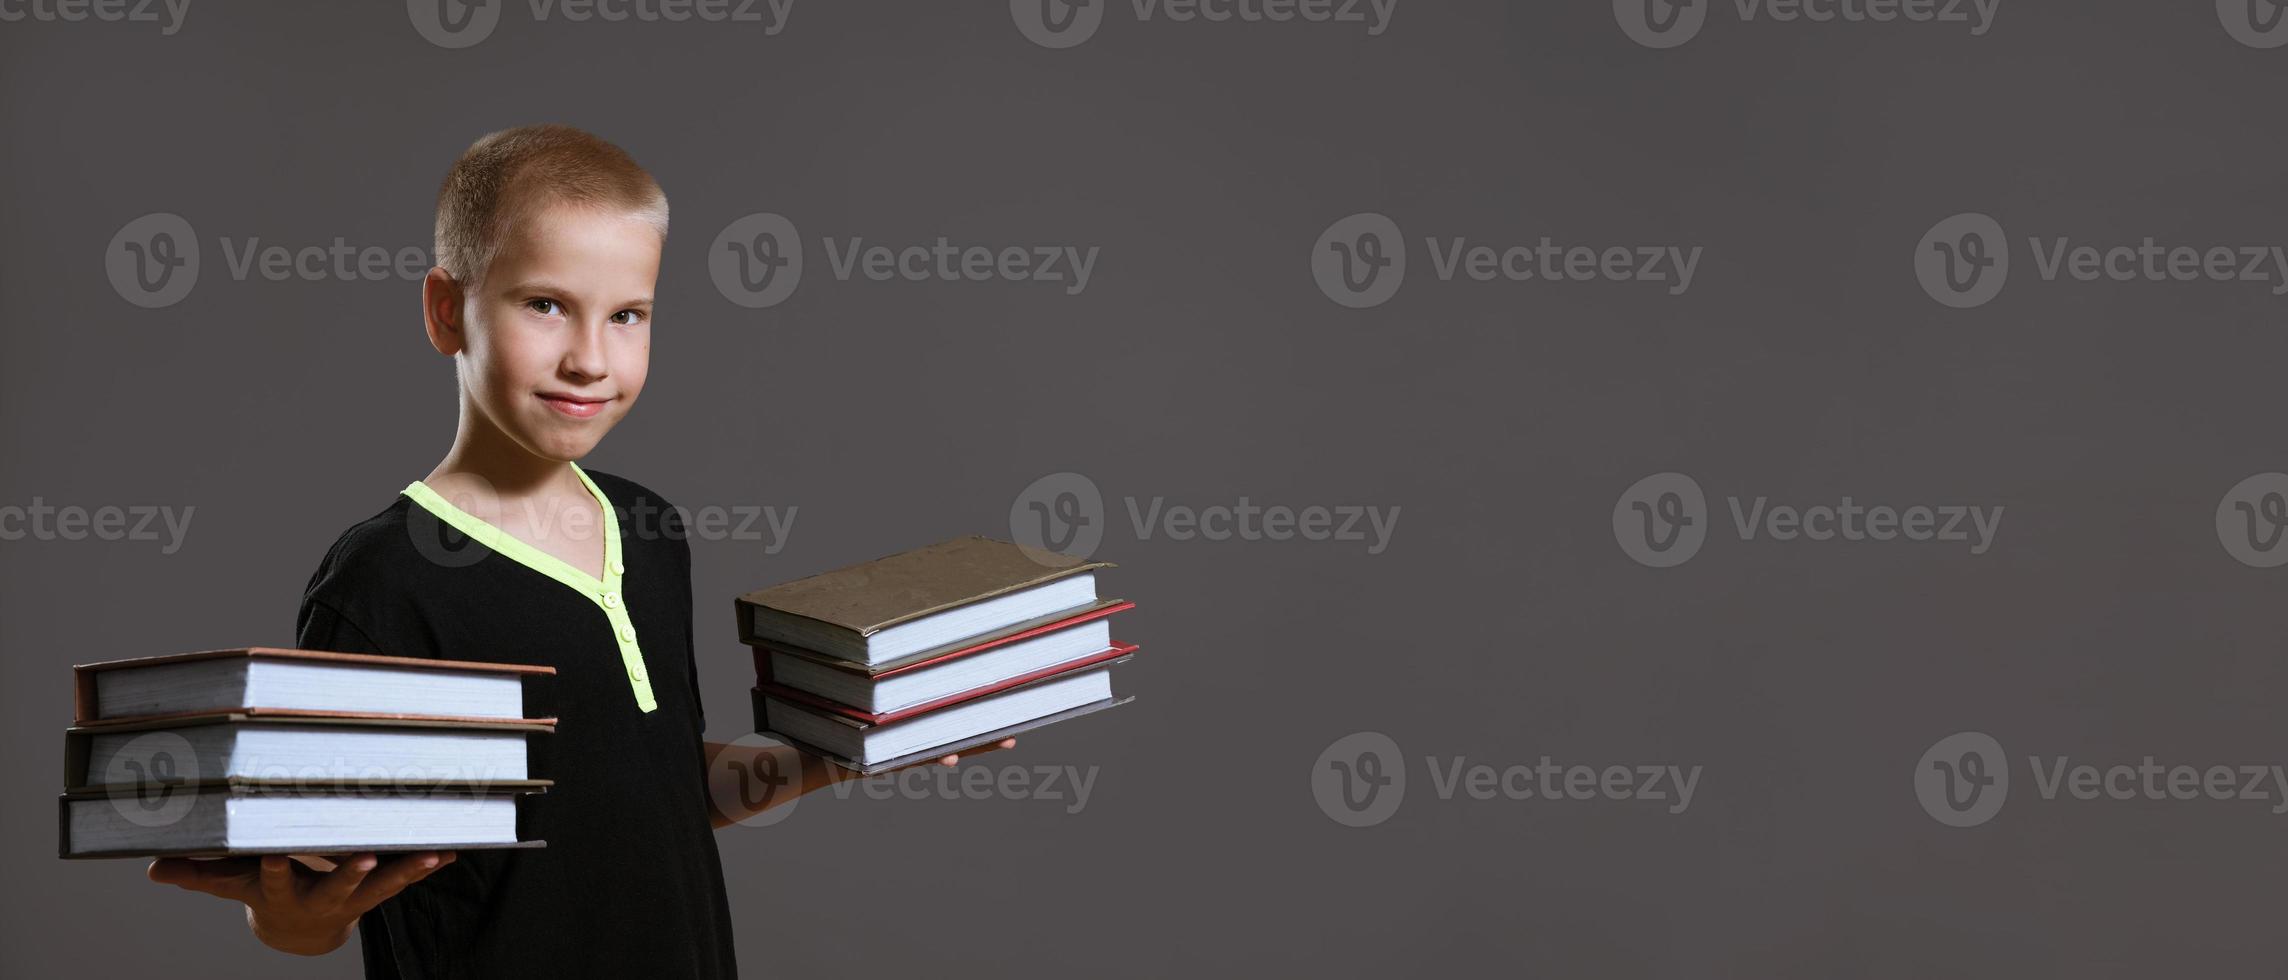 Cute boy holding stacks of books on gray background photo